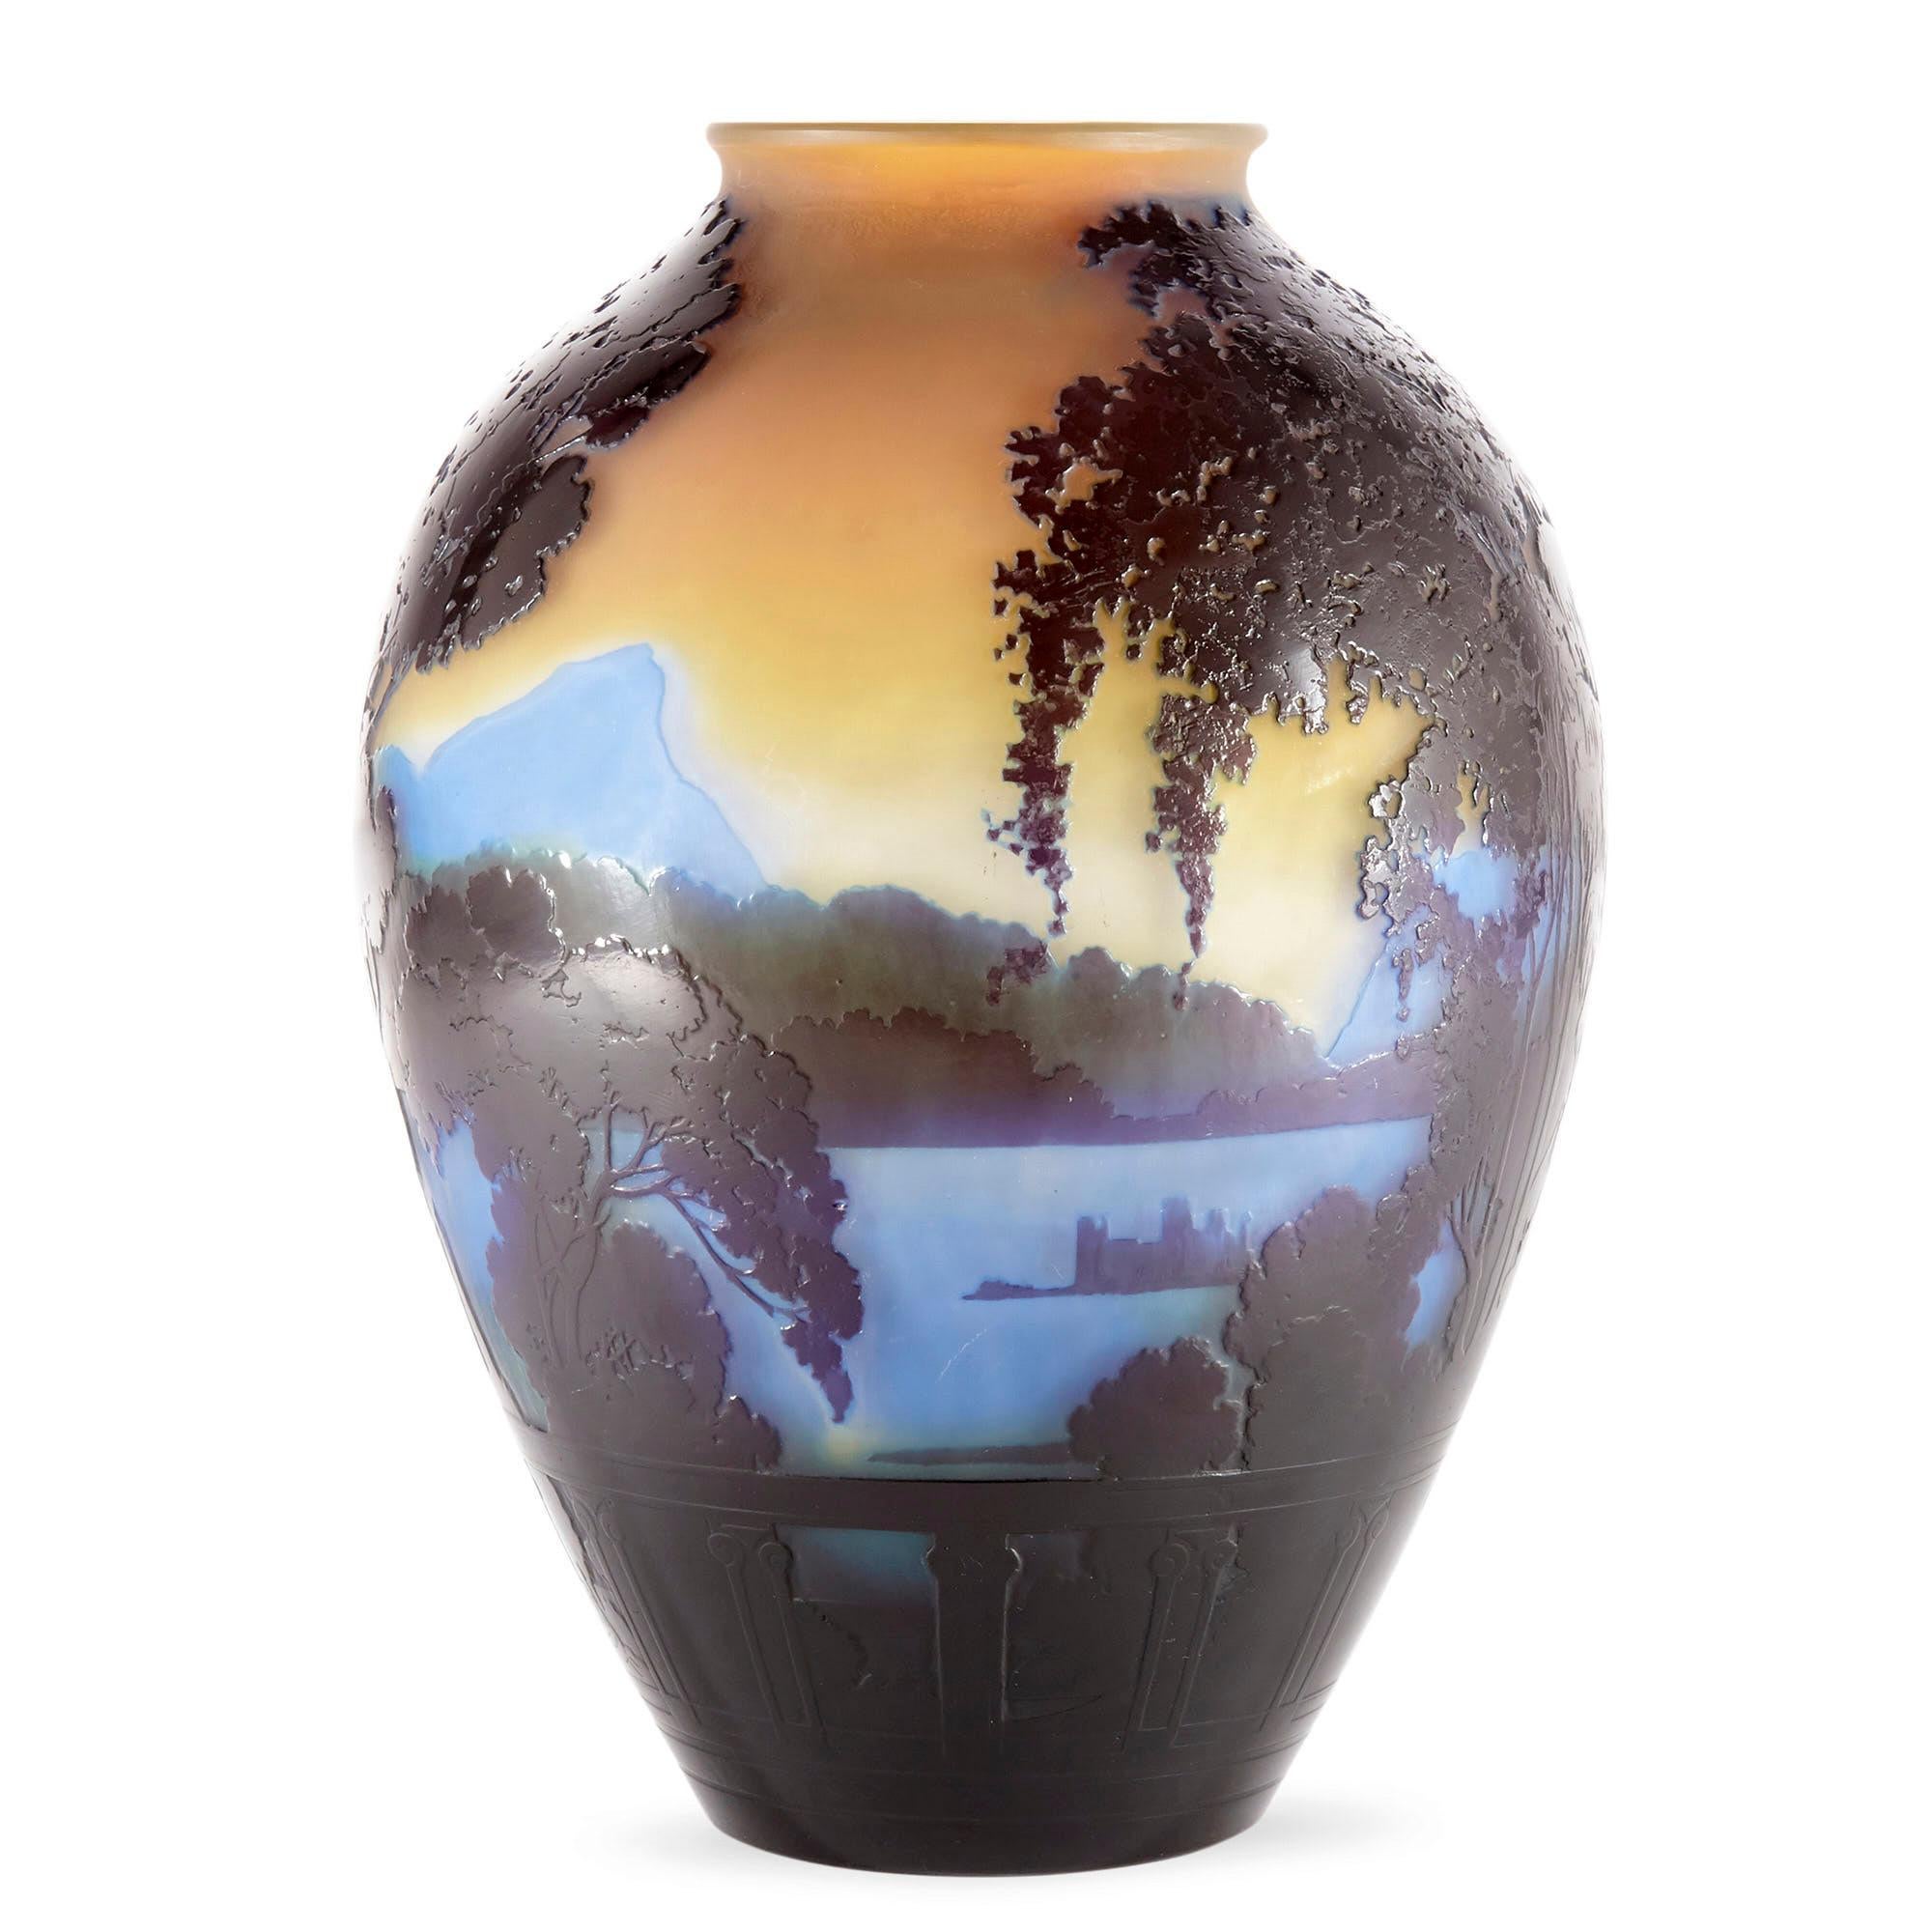 This exquisite Art Nouveau glass vase was crafted by the preeminent French artist and craftsman Émile Gallé. The vase depicts Lake Como in Italy as seen in twilight, the sky a warm orange-red, the lake’s water pale blue, and the tree’s in the